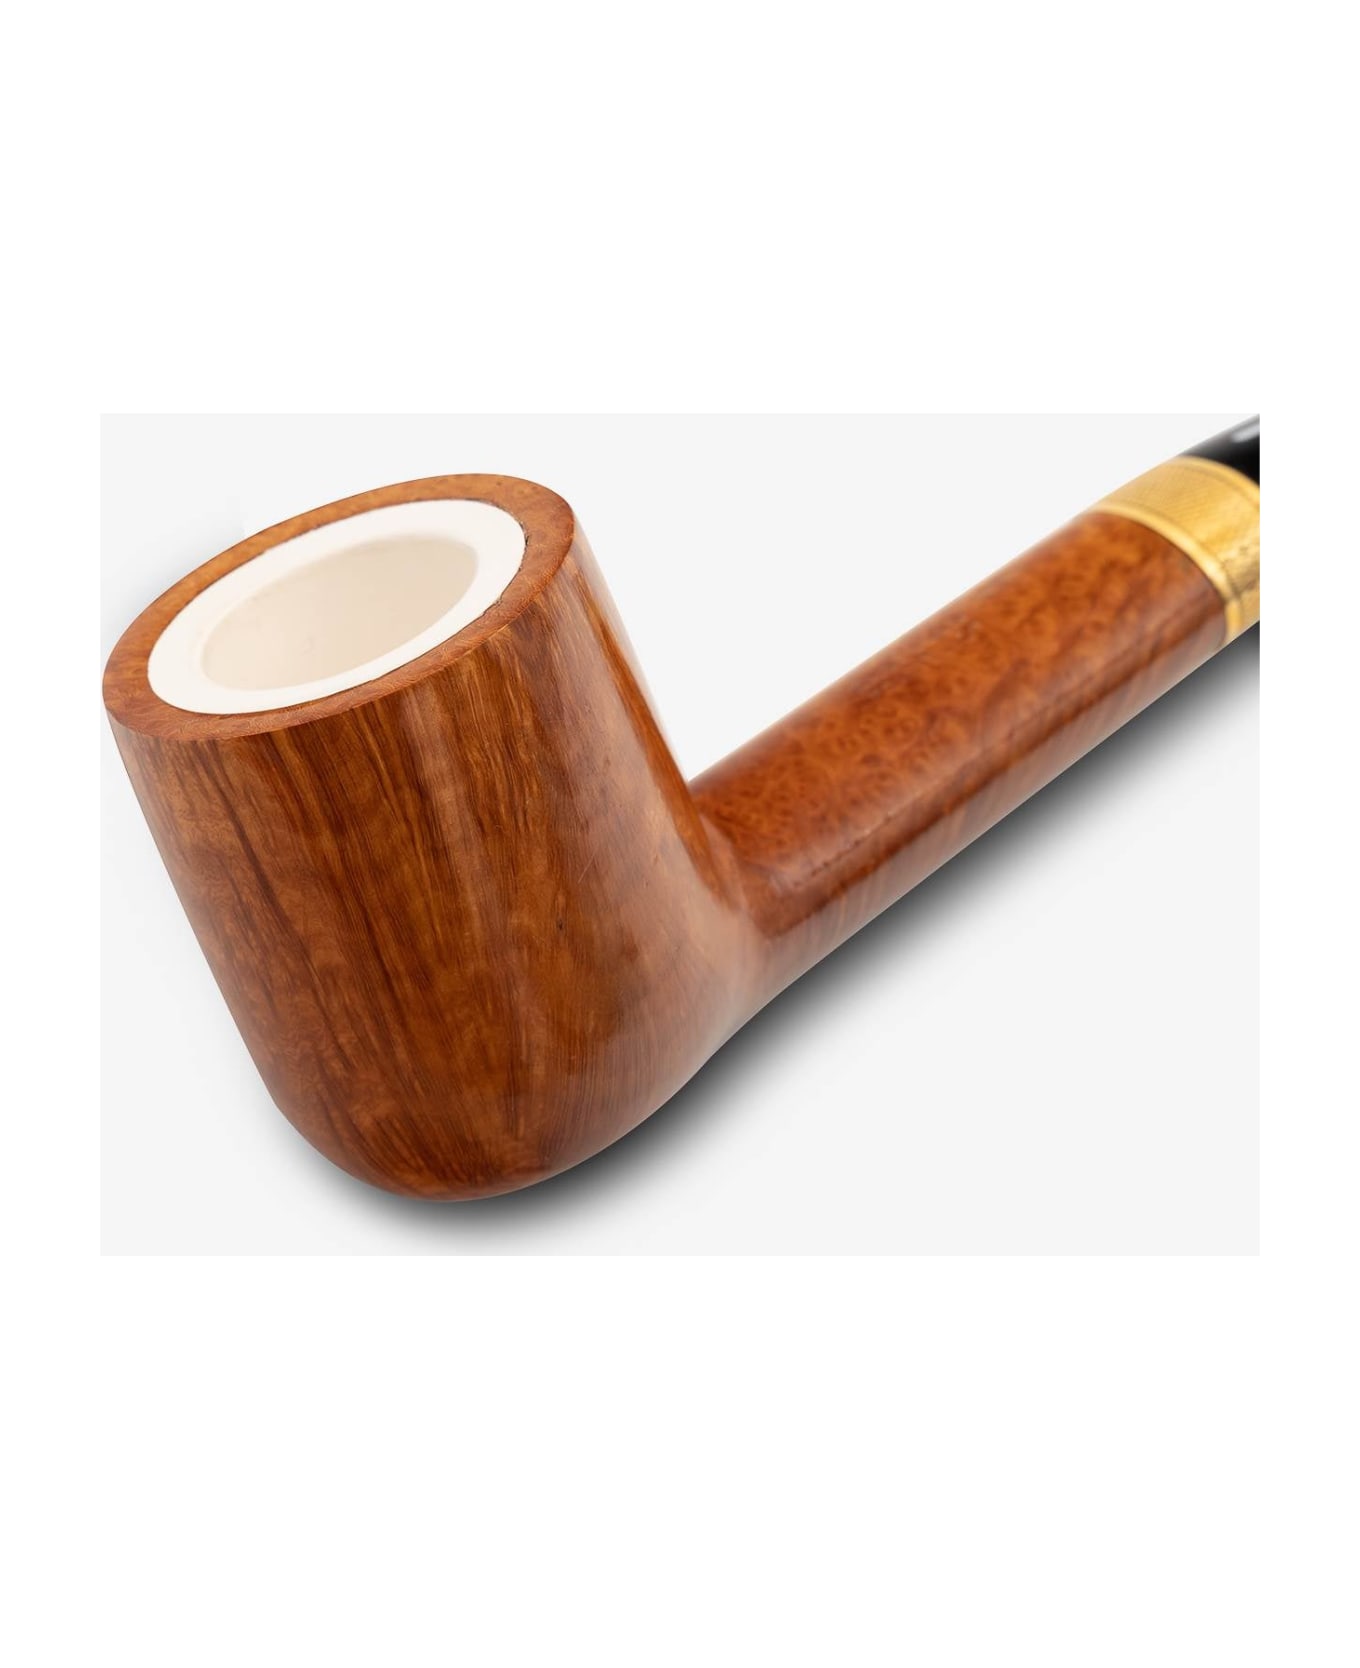 Larusmiani Pipe With Gold Ring  - Neutral